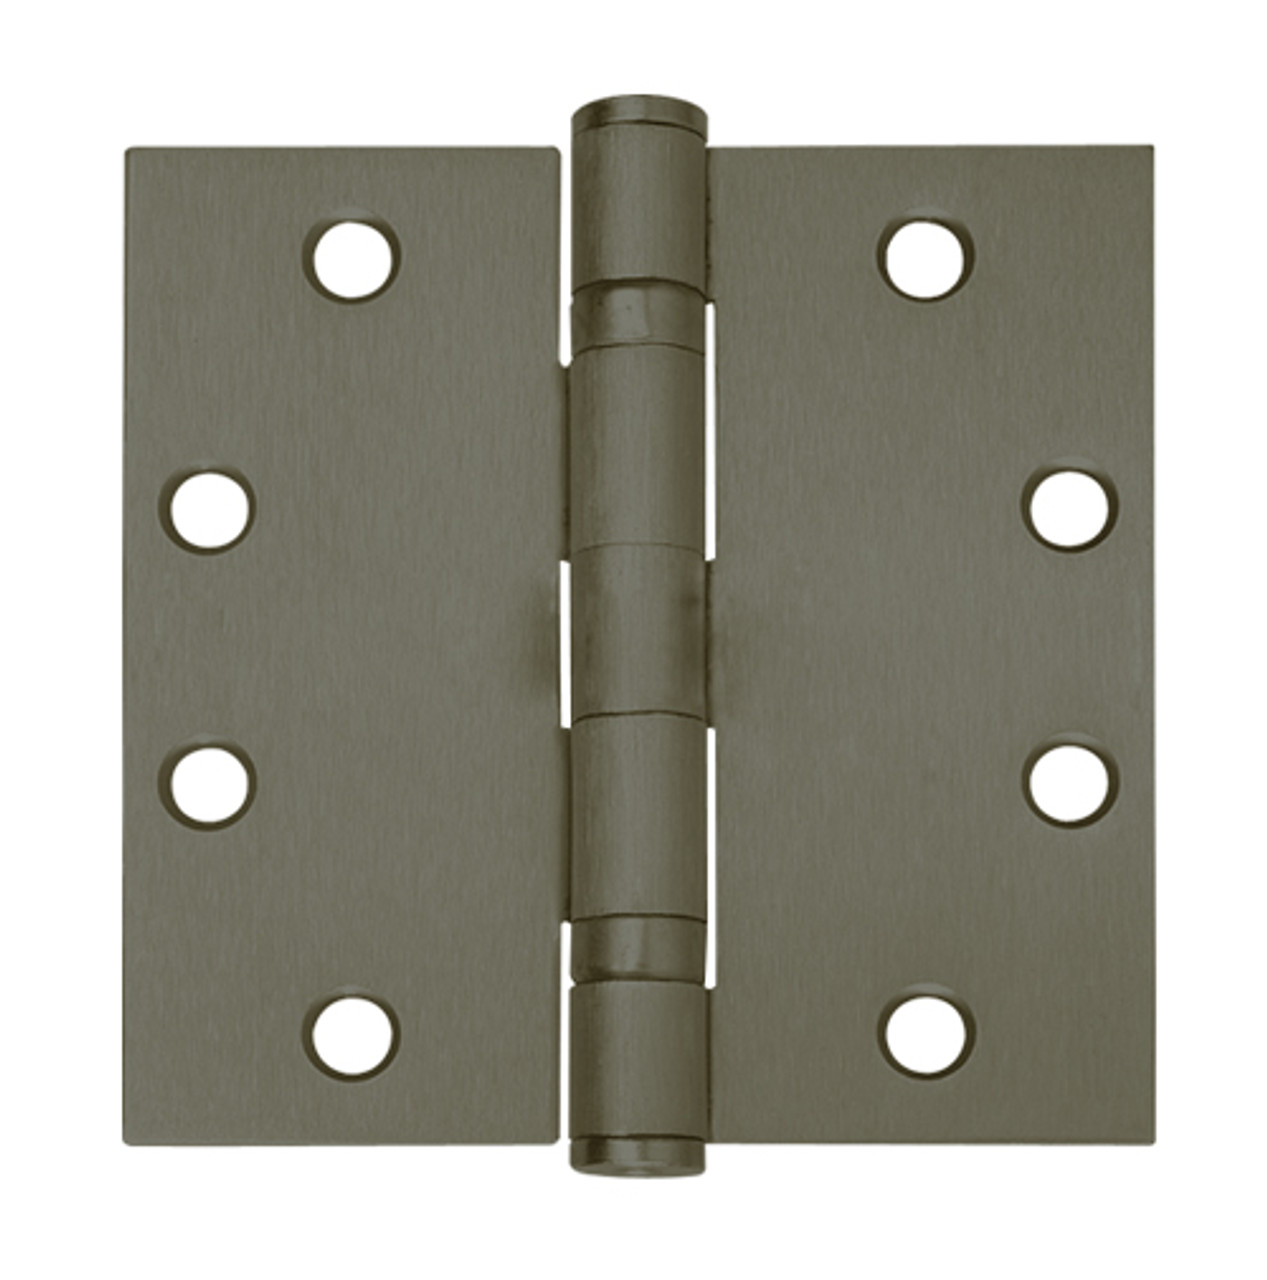 5BB1-4-5x4-640-TW4 IVES 5 Knuckle Ball Bearing Full Mortise Hinge with Electric Thru-Wire in Dark Bronze